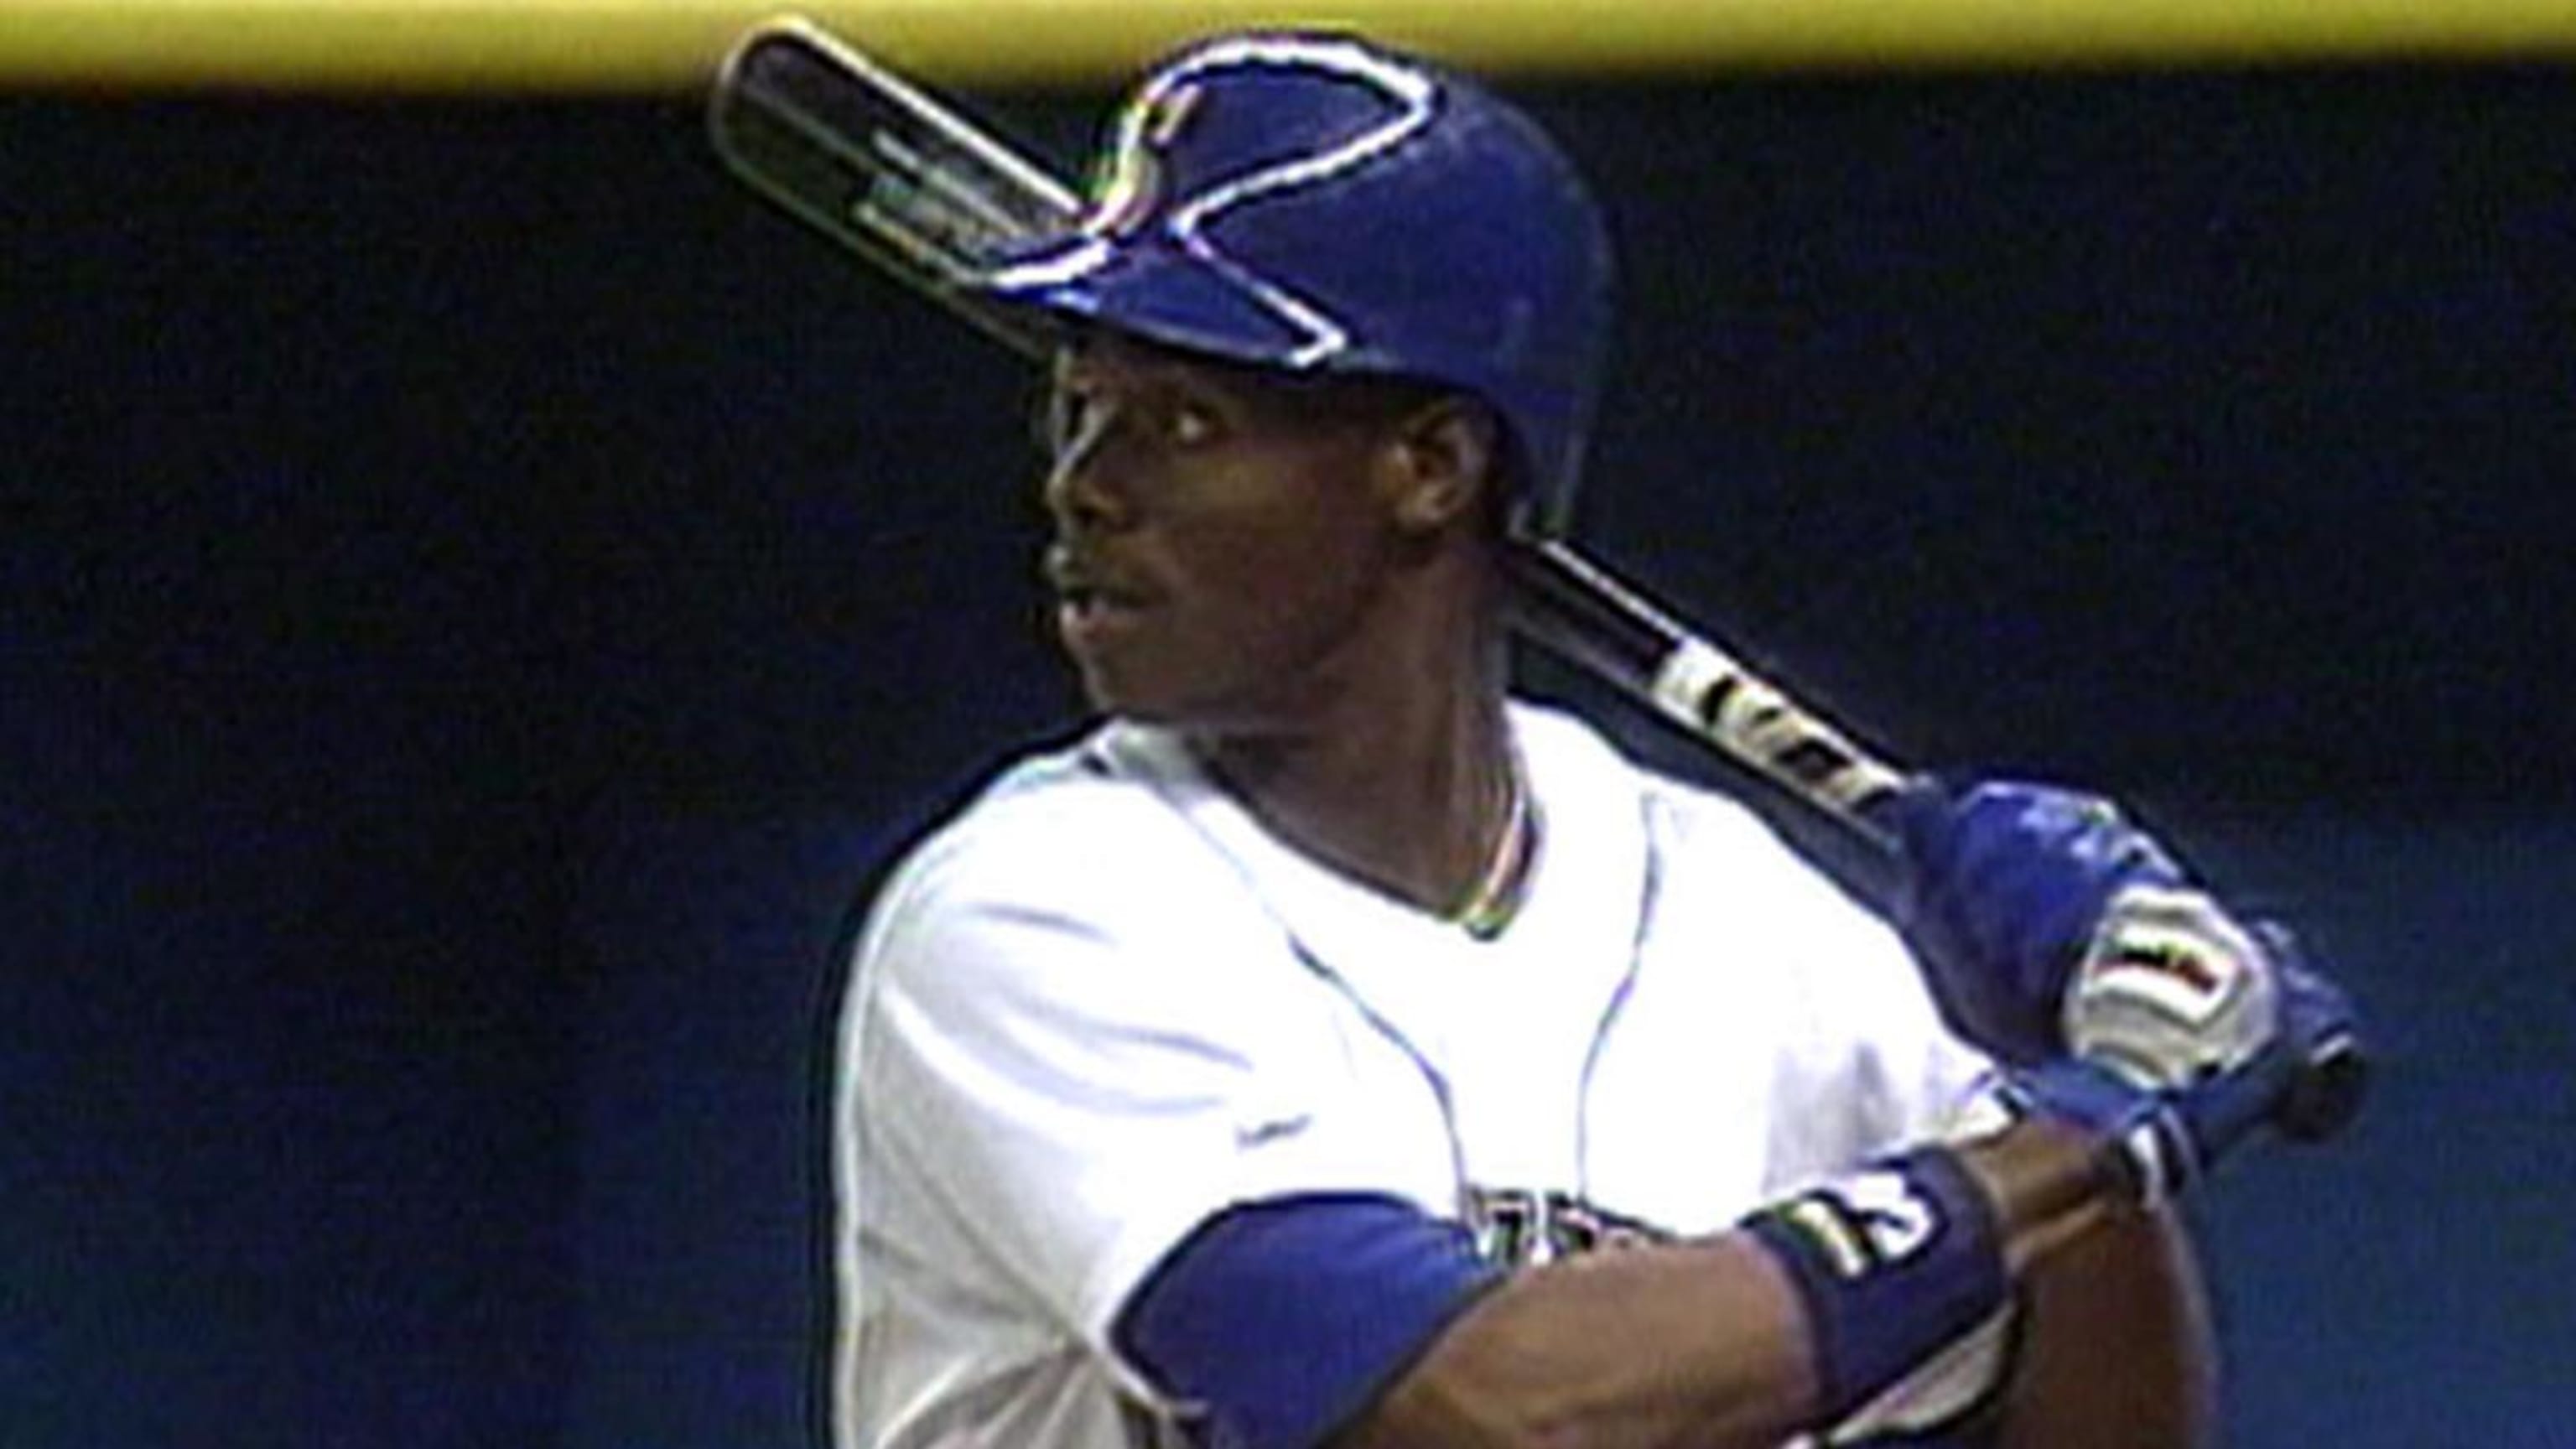 Griffey's first big league hit, 04/03/1989